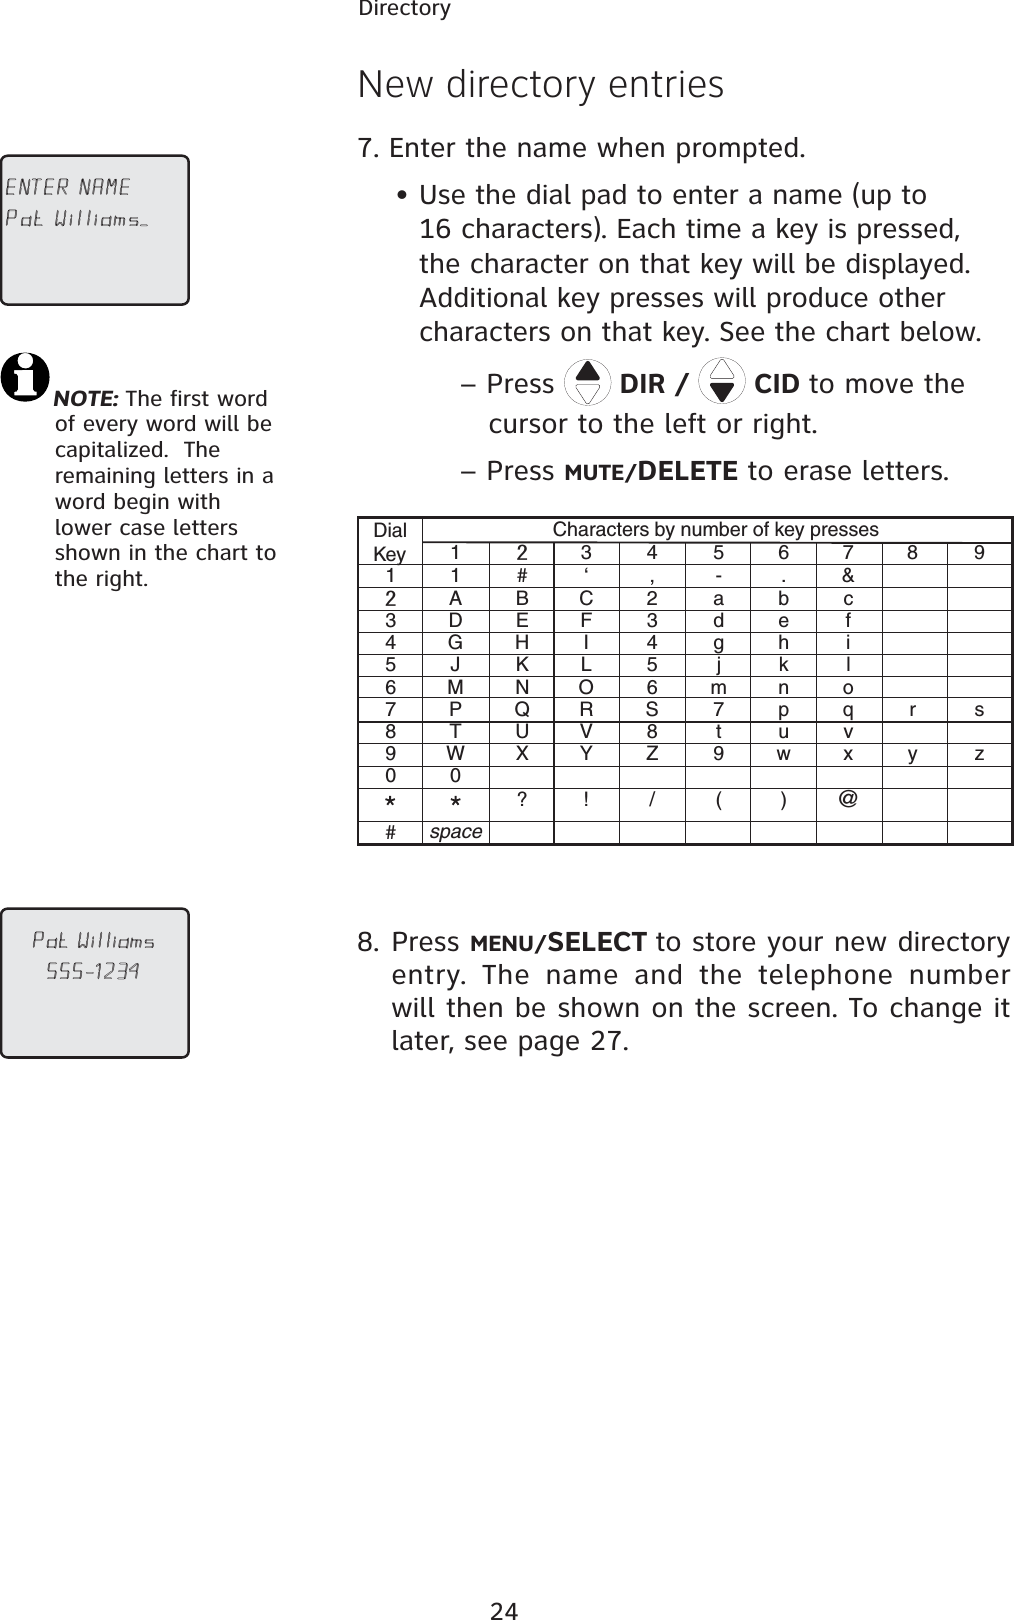 24DirectoryNew directory entries7. Enter the name when prompted. • Use the dial pad to enter a name (up to         16 characters). Each time a key is pressed,          the character on that key will be displayed.    Additional key presses will produce other        characters on that key. See the chart below.– Press  DIR /   CID to move the    cursor to the left or right.– Press MUTE/DELETE to erase letters.DialKeyCharacters by number of key presses1345678900##, .-&amp;‘?! / ( )@11ABC2abc3def4ghi5jkl6mnoS7pq8tuvZ9wxryszDEFGHIJKLMNOPQRTUVWspaceXY34567898. Press MENU/SELECT to store your new directory entry. The name and the telephone number will then be shown on the screen. To change it later, see page 27.%.4%2.!-%0AT7ILLIAMS?0AT7ILLIAMSNOTE: The first word    of every word will be    capitalized.  The    remaining letters in a    word begin with    lower case letters    shown in the chart to    the right. 